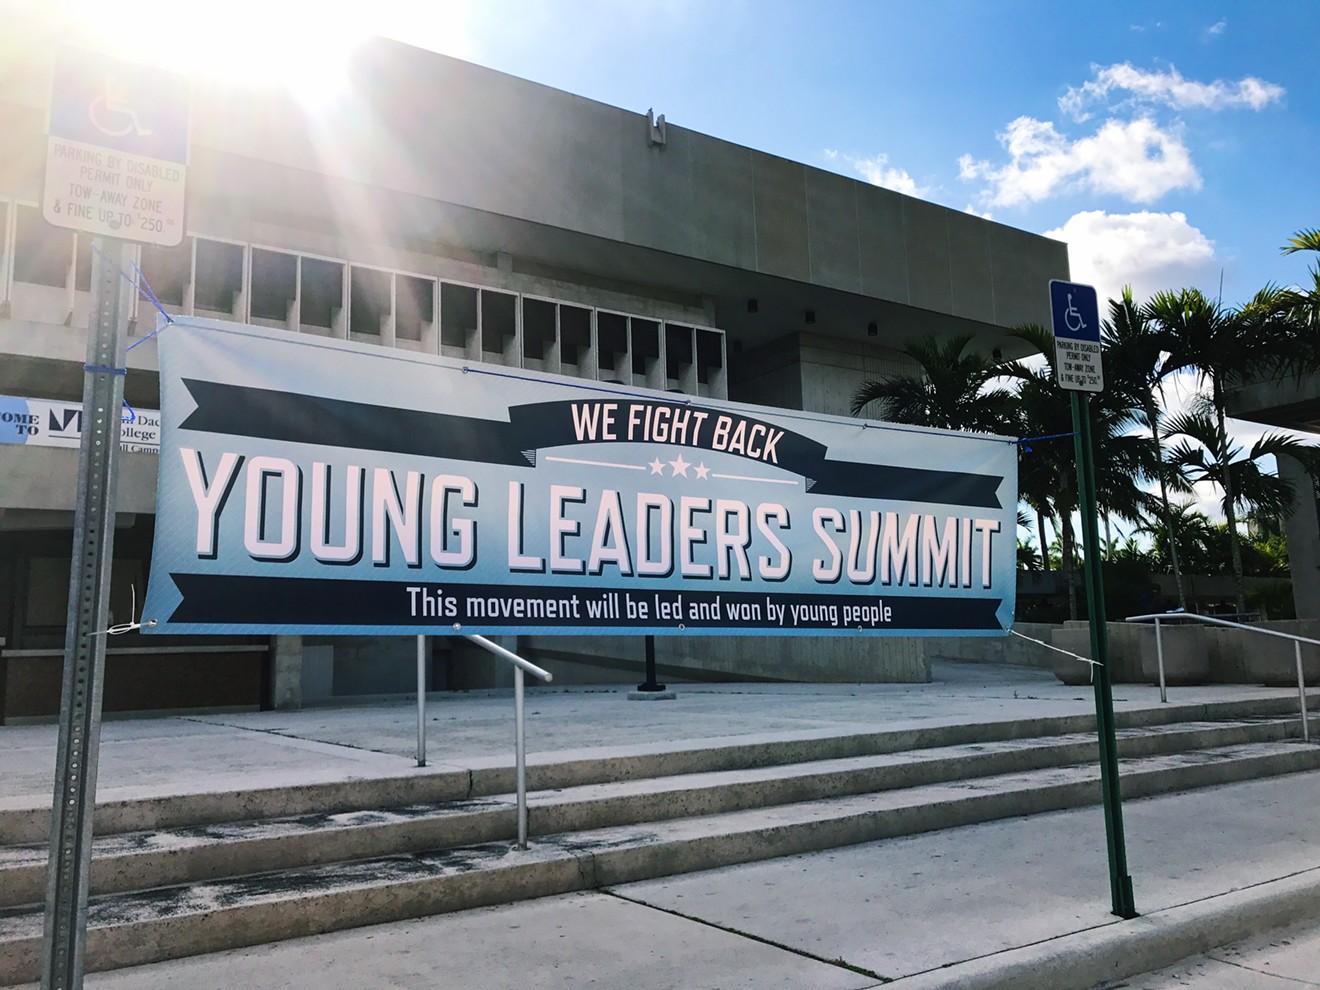 The Young Leaders Summit brought together students, activists, and organizers to talk about building a movement.